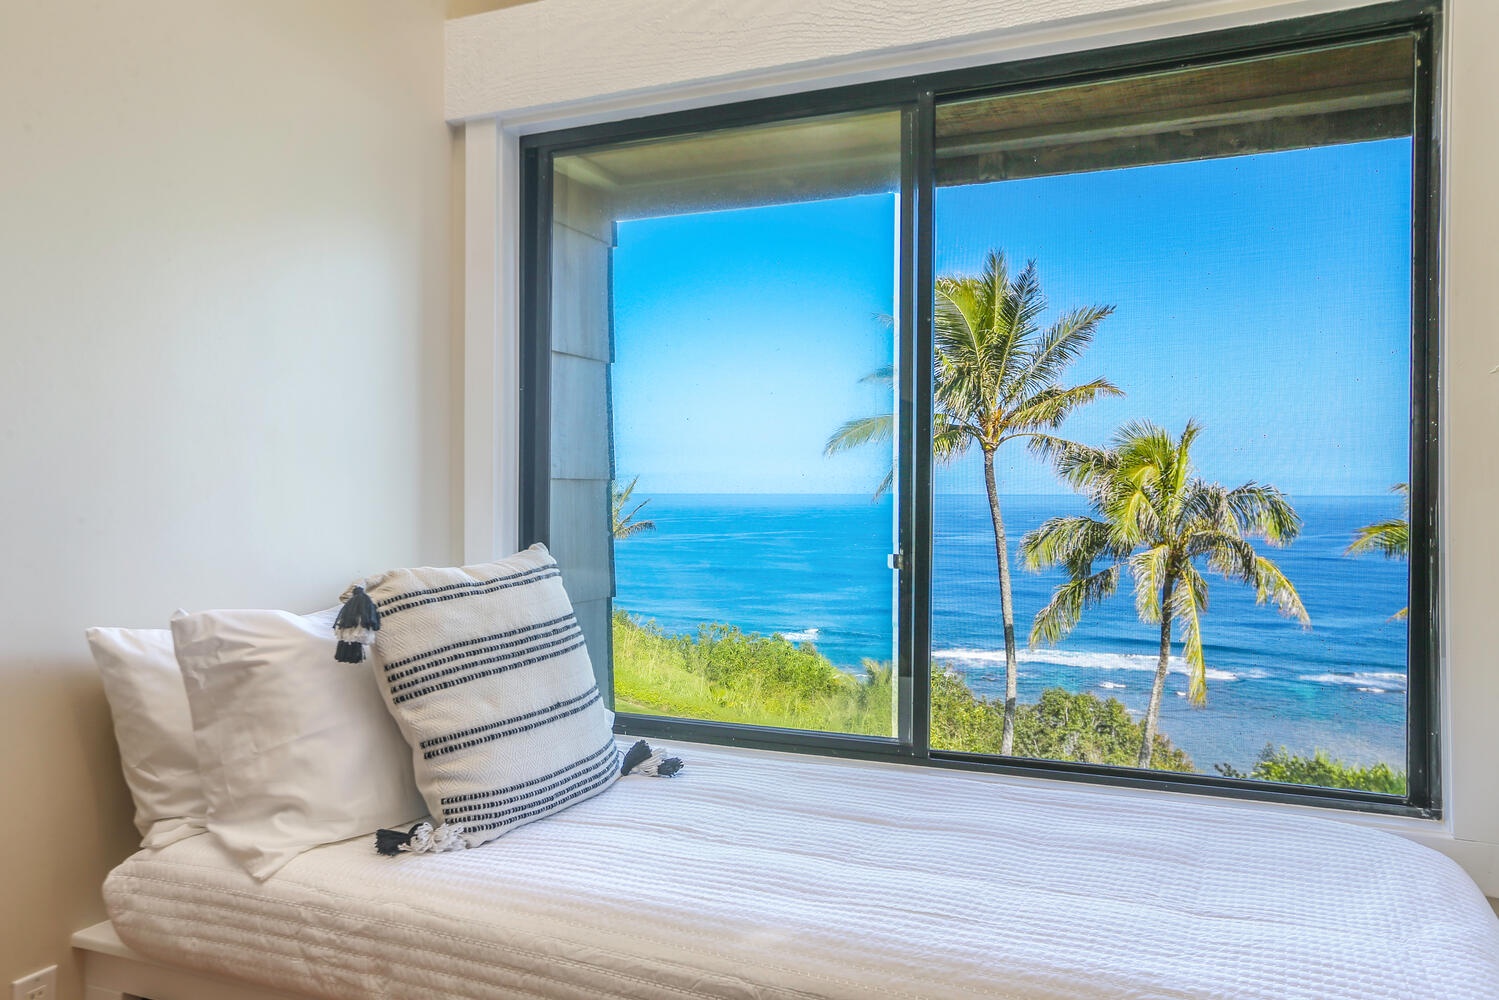 Princeville Vacation Rentals, Sealodge J8 - Just imagine waking up with this stellar view in paradise